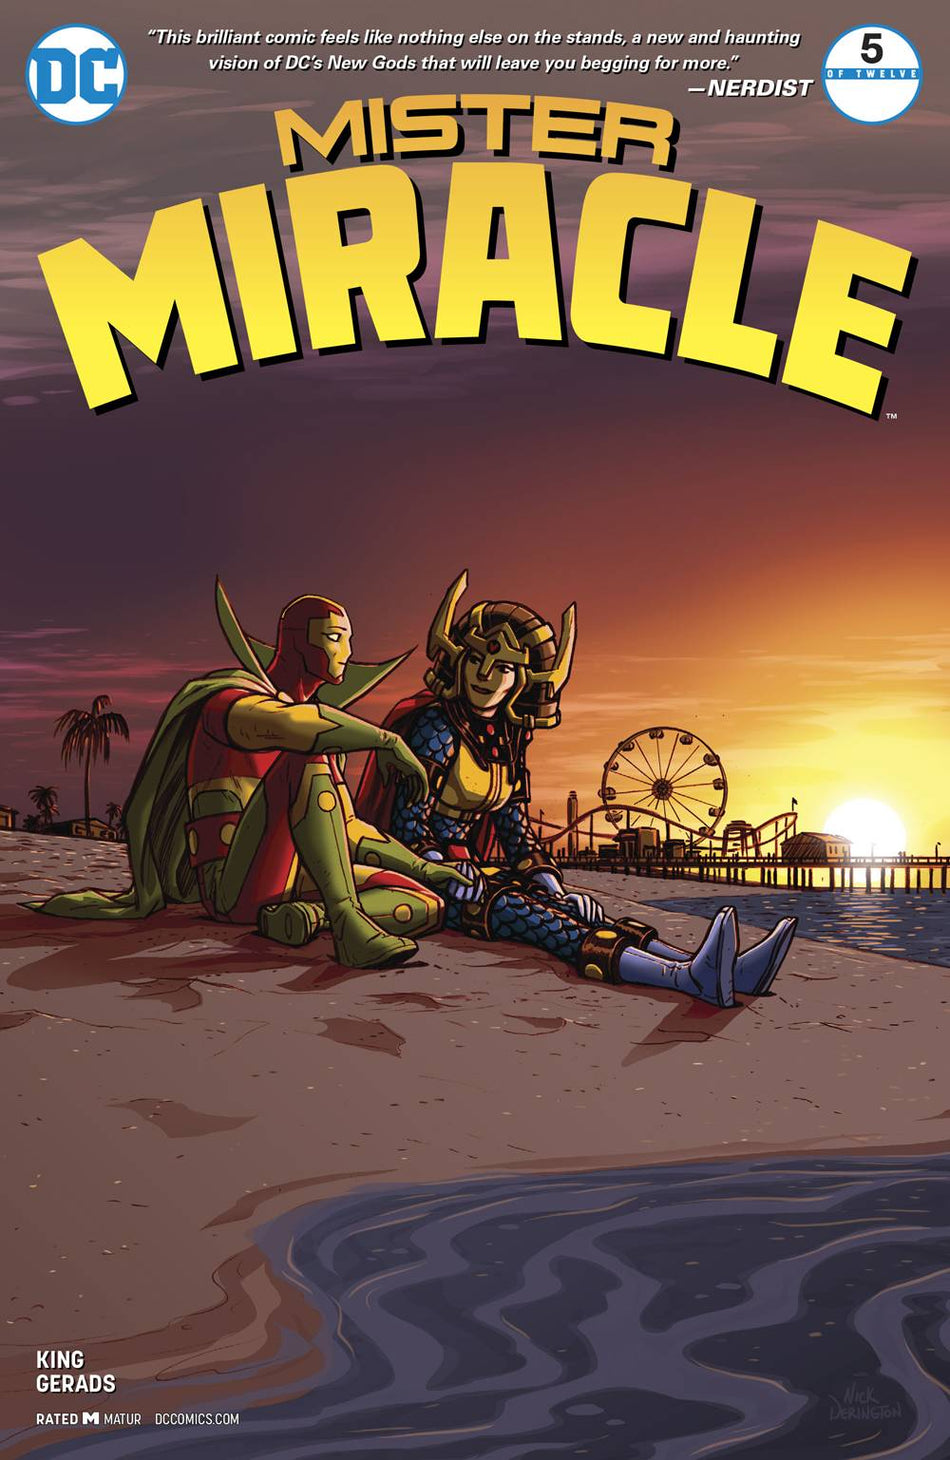 Image of Mister Miracle Issue 5 (of 12) comic Sold by Stronghold Collectibles